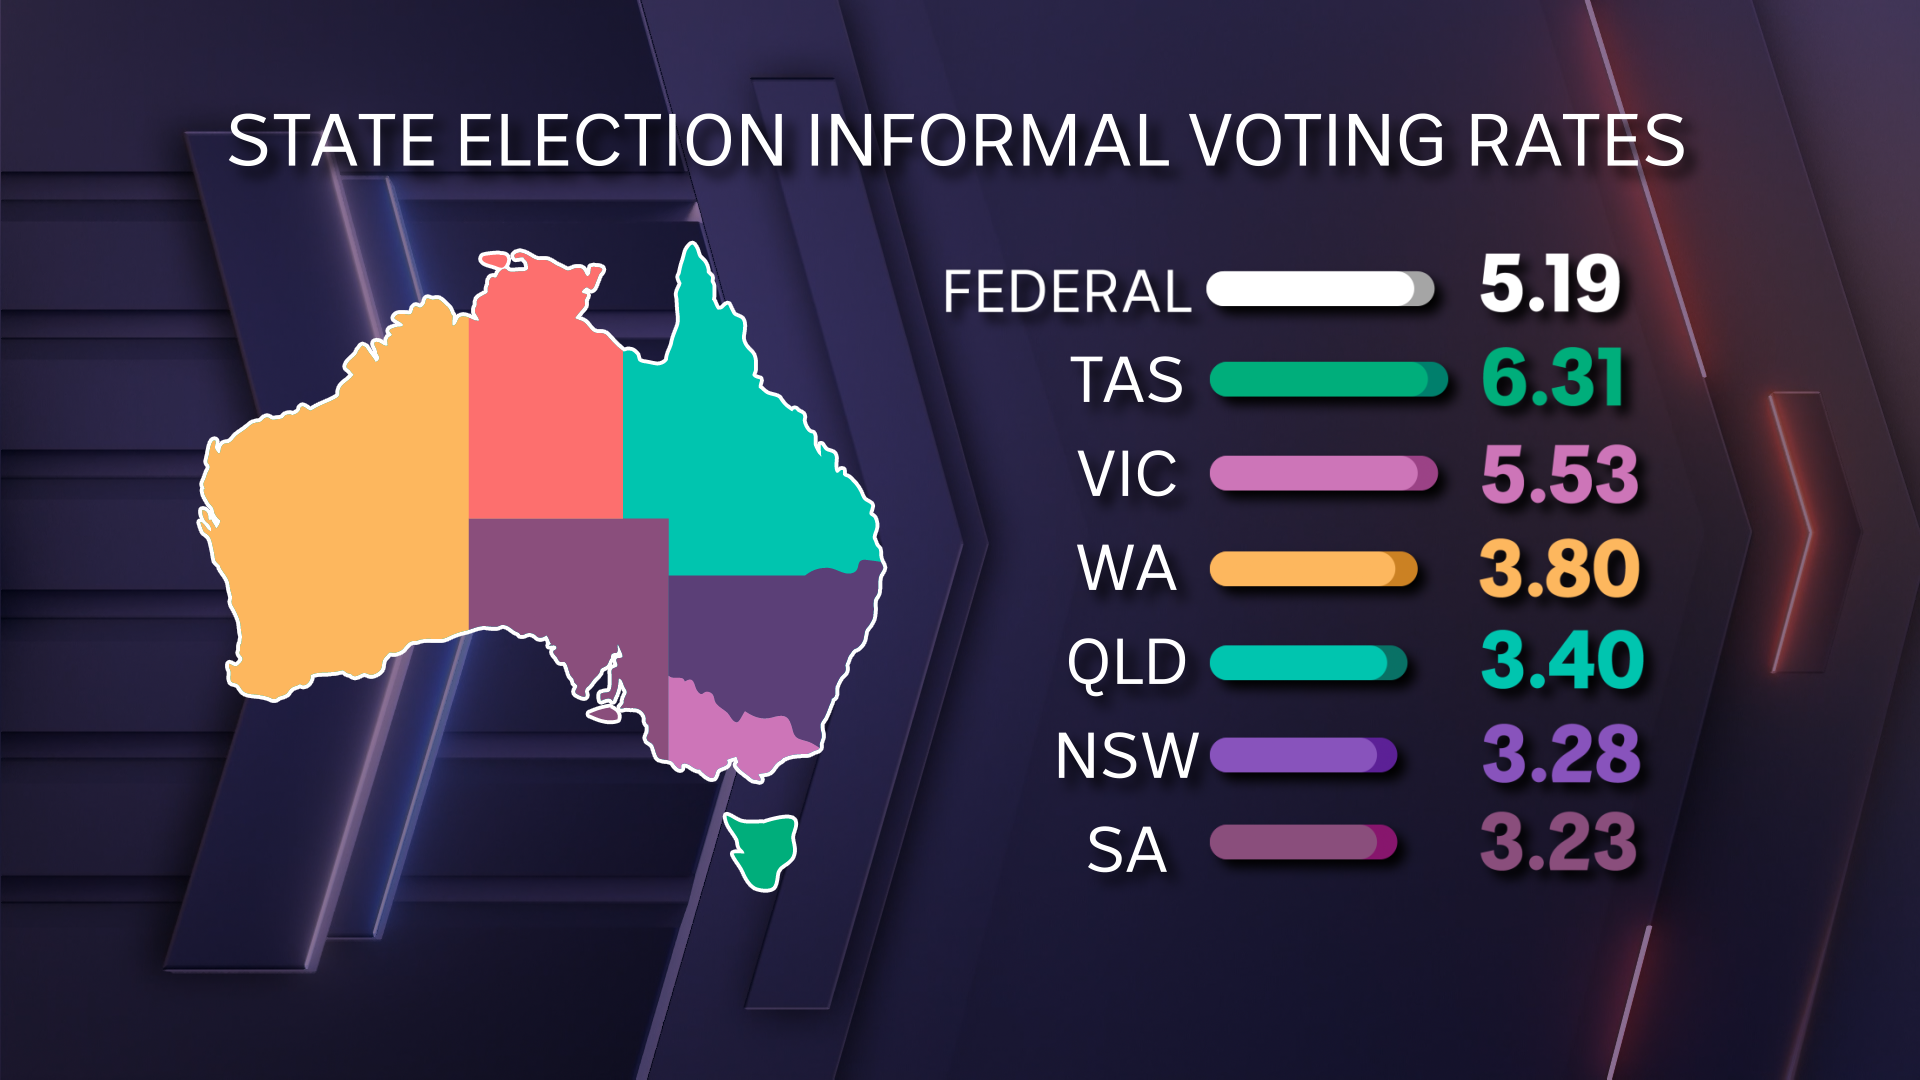 A graphic of Australia detailing the national informal voting rate, and the rate for each state